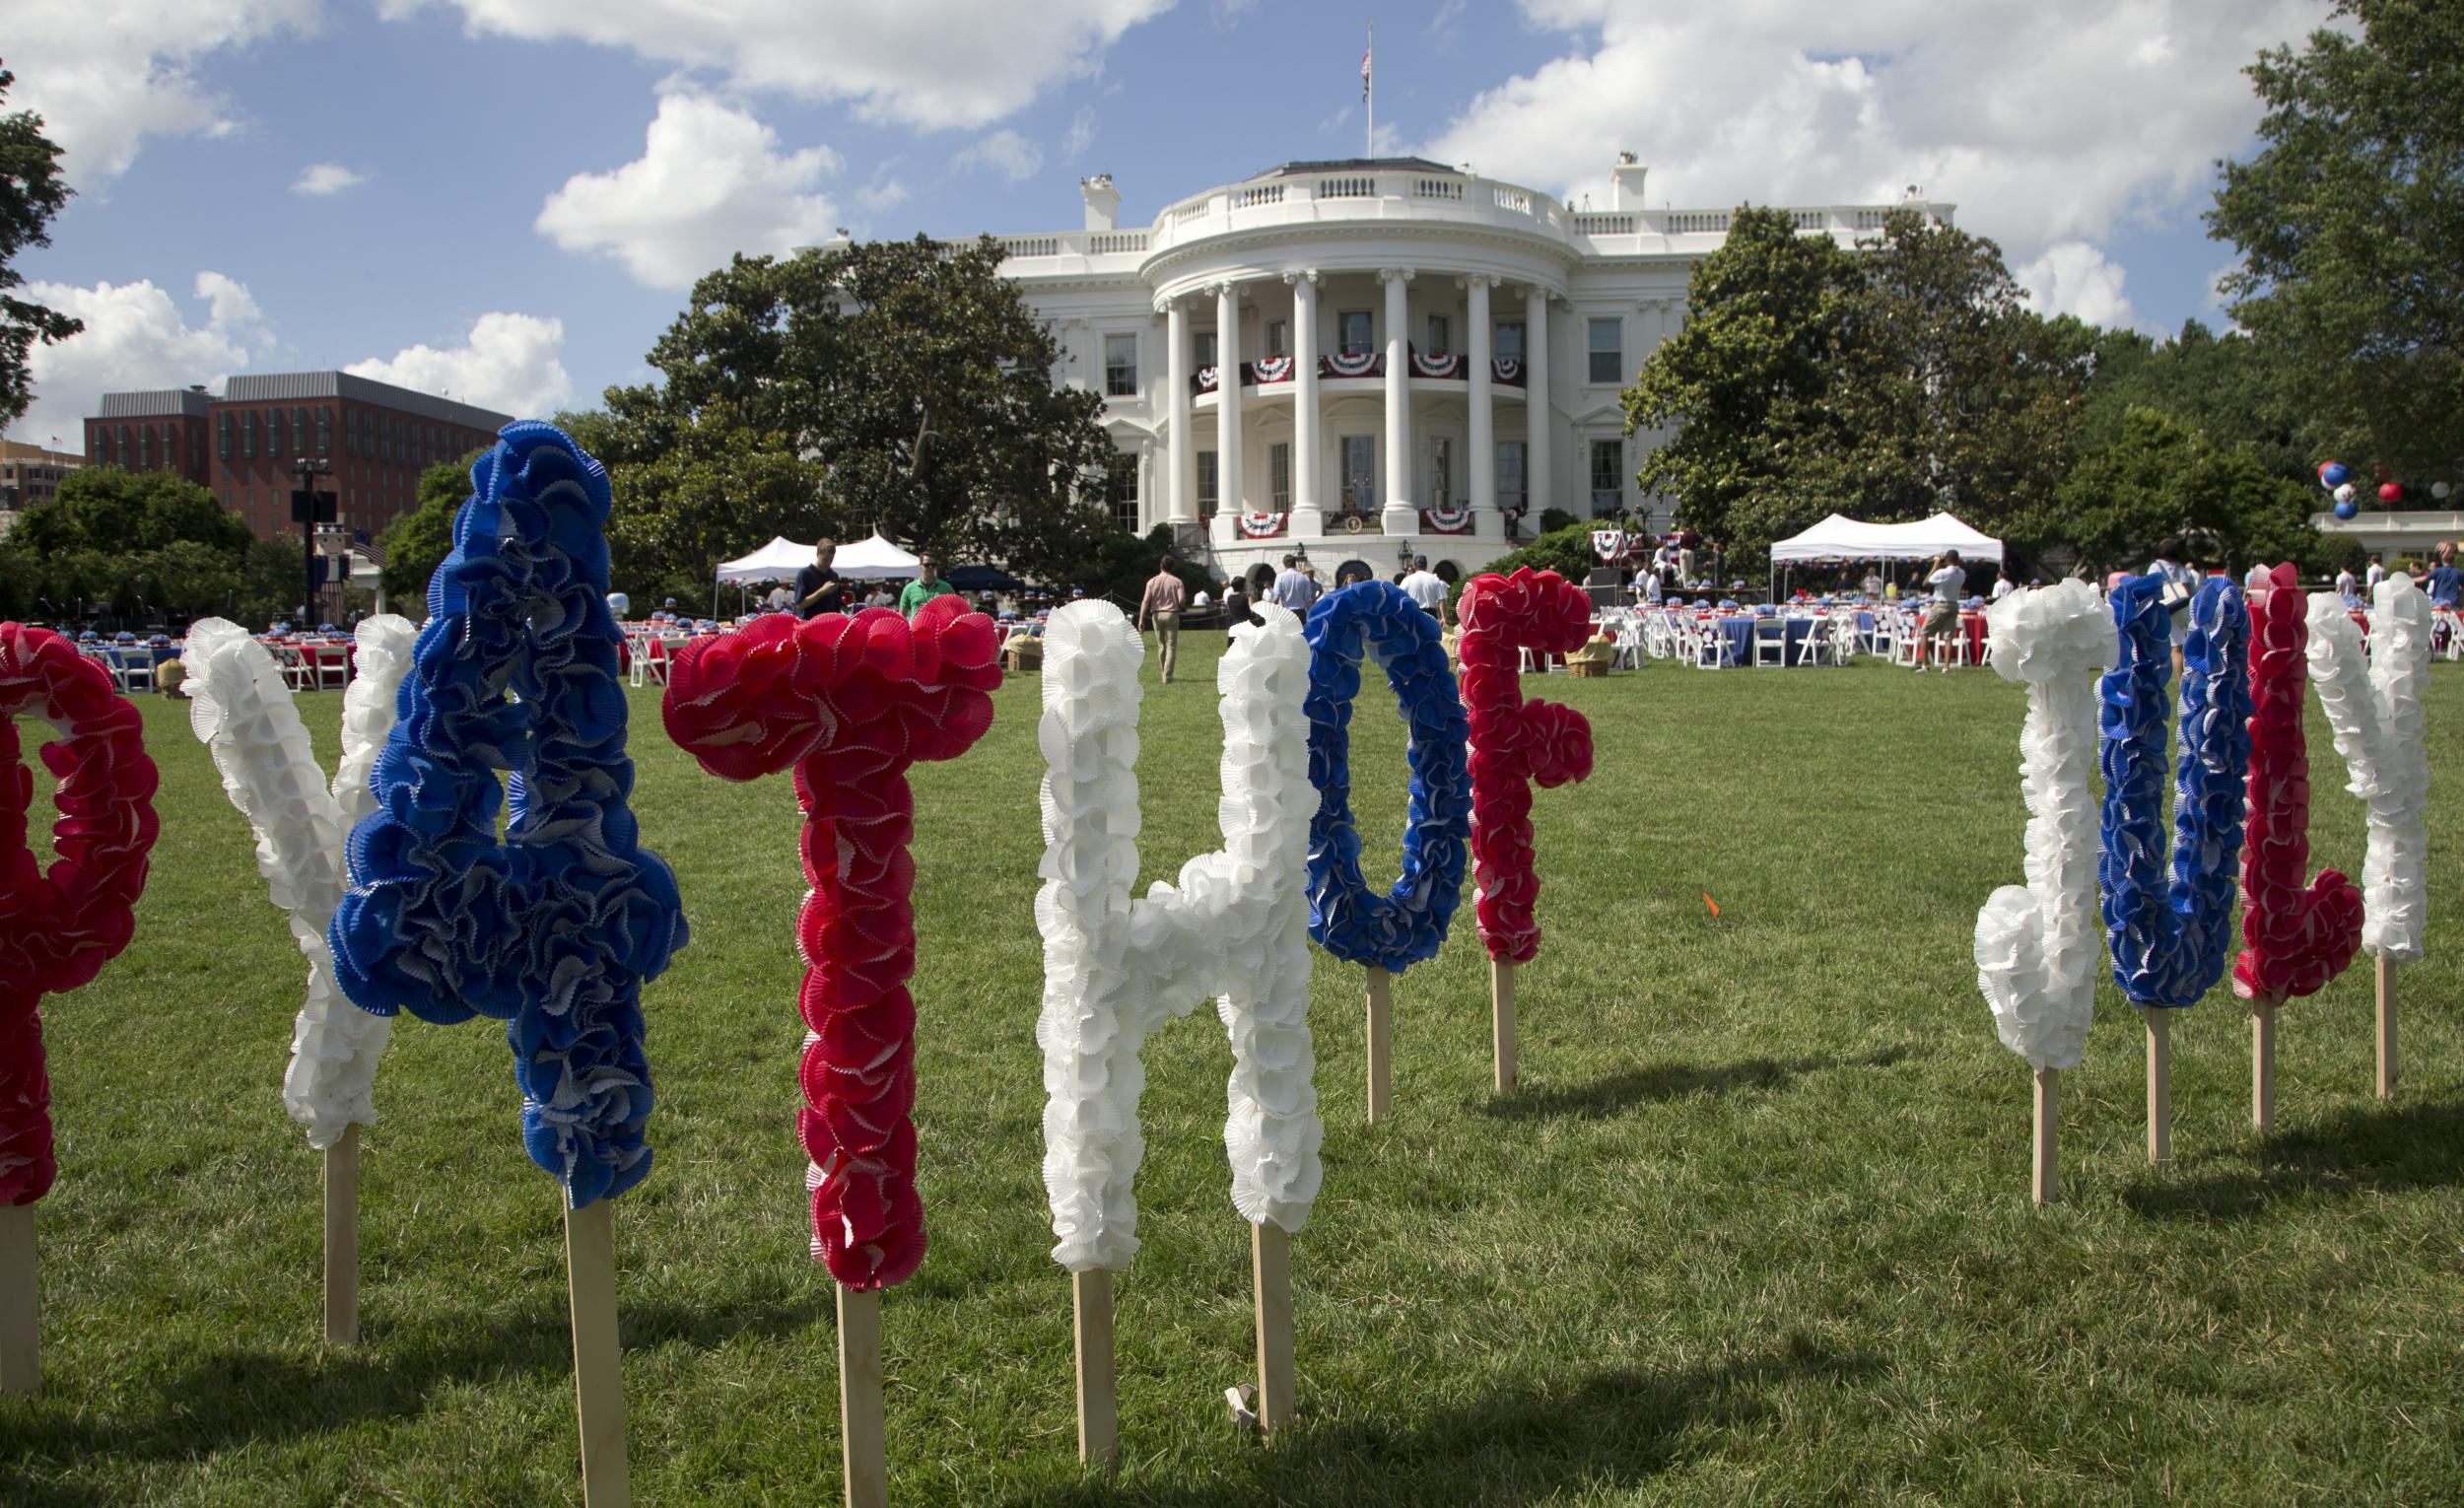 Who will be taking to the South Lawn stage this year?